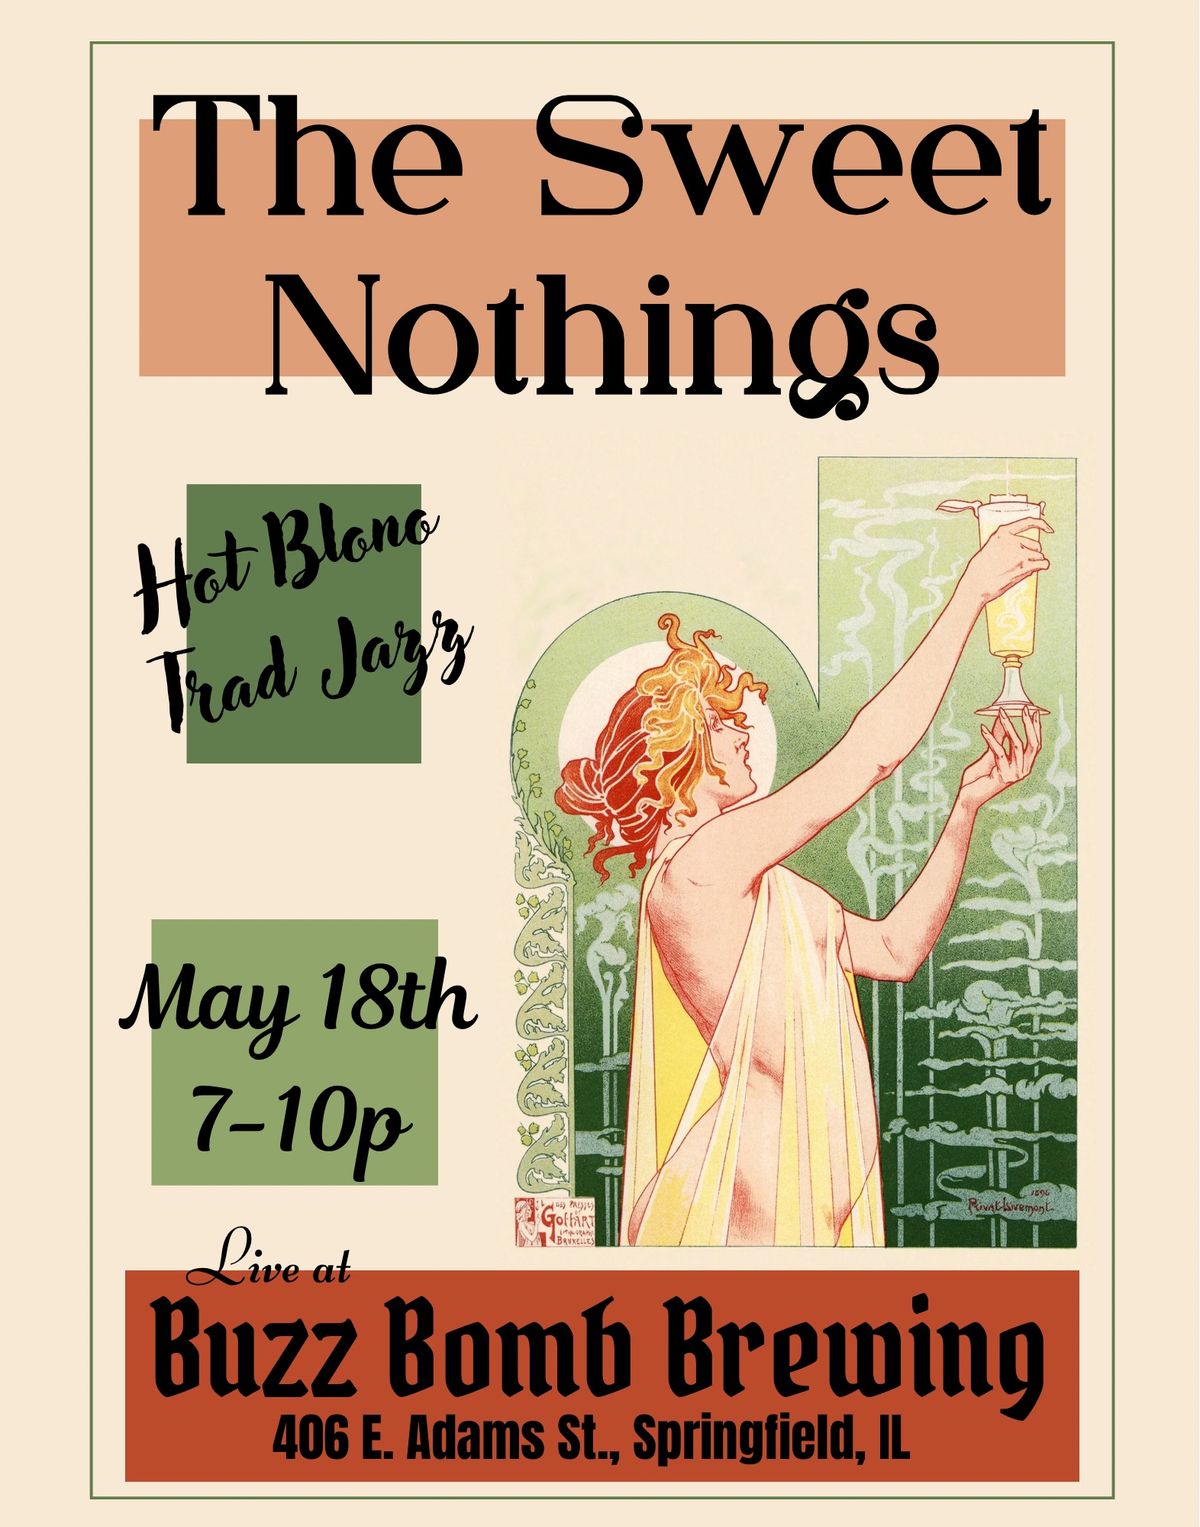 The Sweet Nothings live at Buzz Bomb Brewing